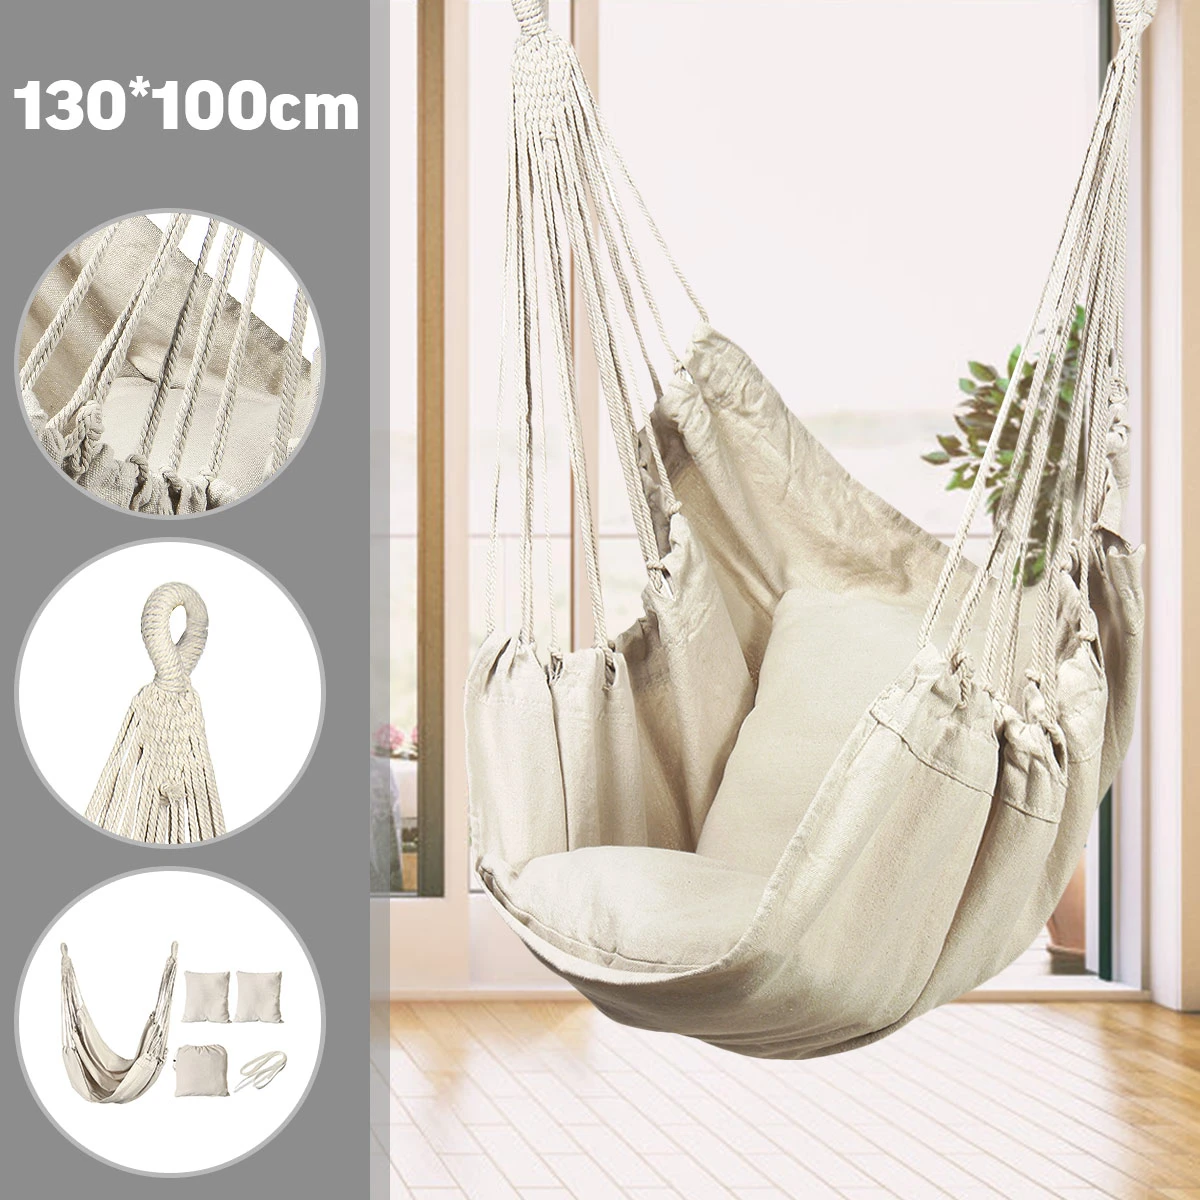 Hammock Chair Outdoor Indoor Garden Bedroom Furniture Outdoor Hanging Chair  For Child Adult Safety Camping Swing Chair - Hammocks - AliExpress